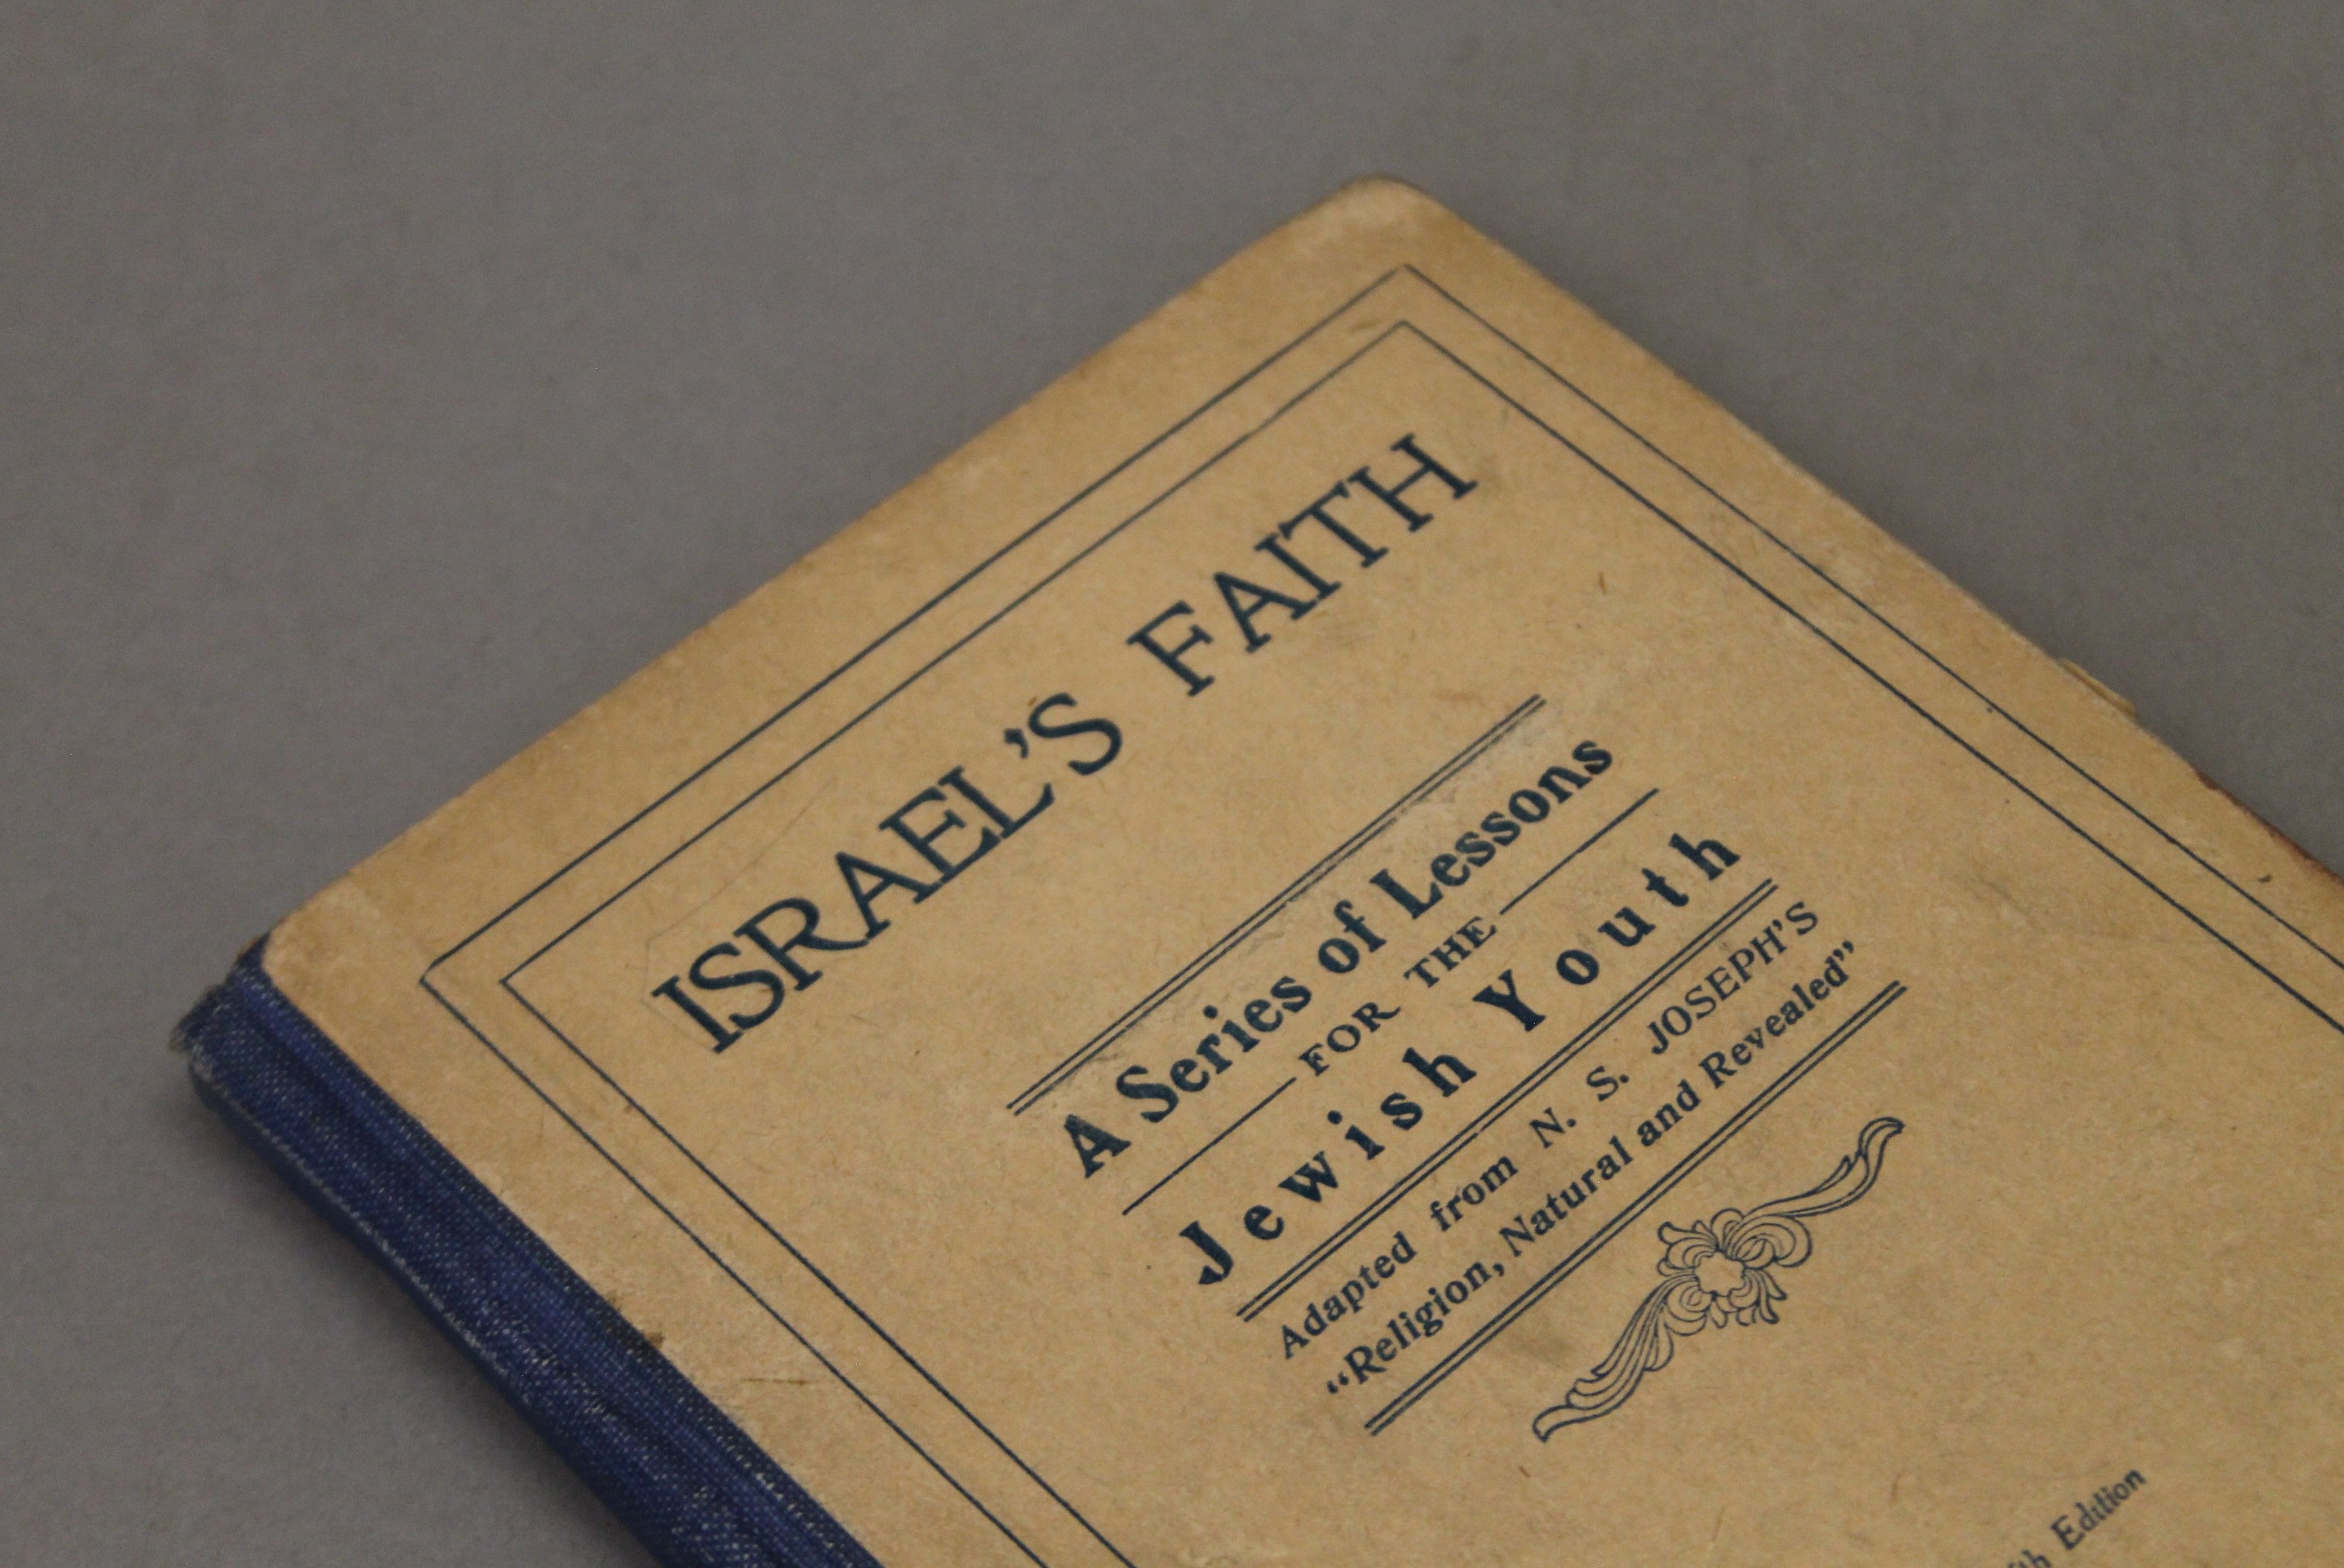 Jewish Opinion, The Bulletin of the League of Jews, 1919; and nine other Jewish titles. - Image 41 of 42